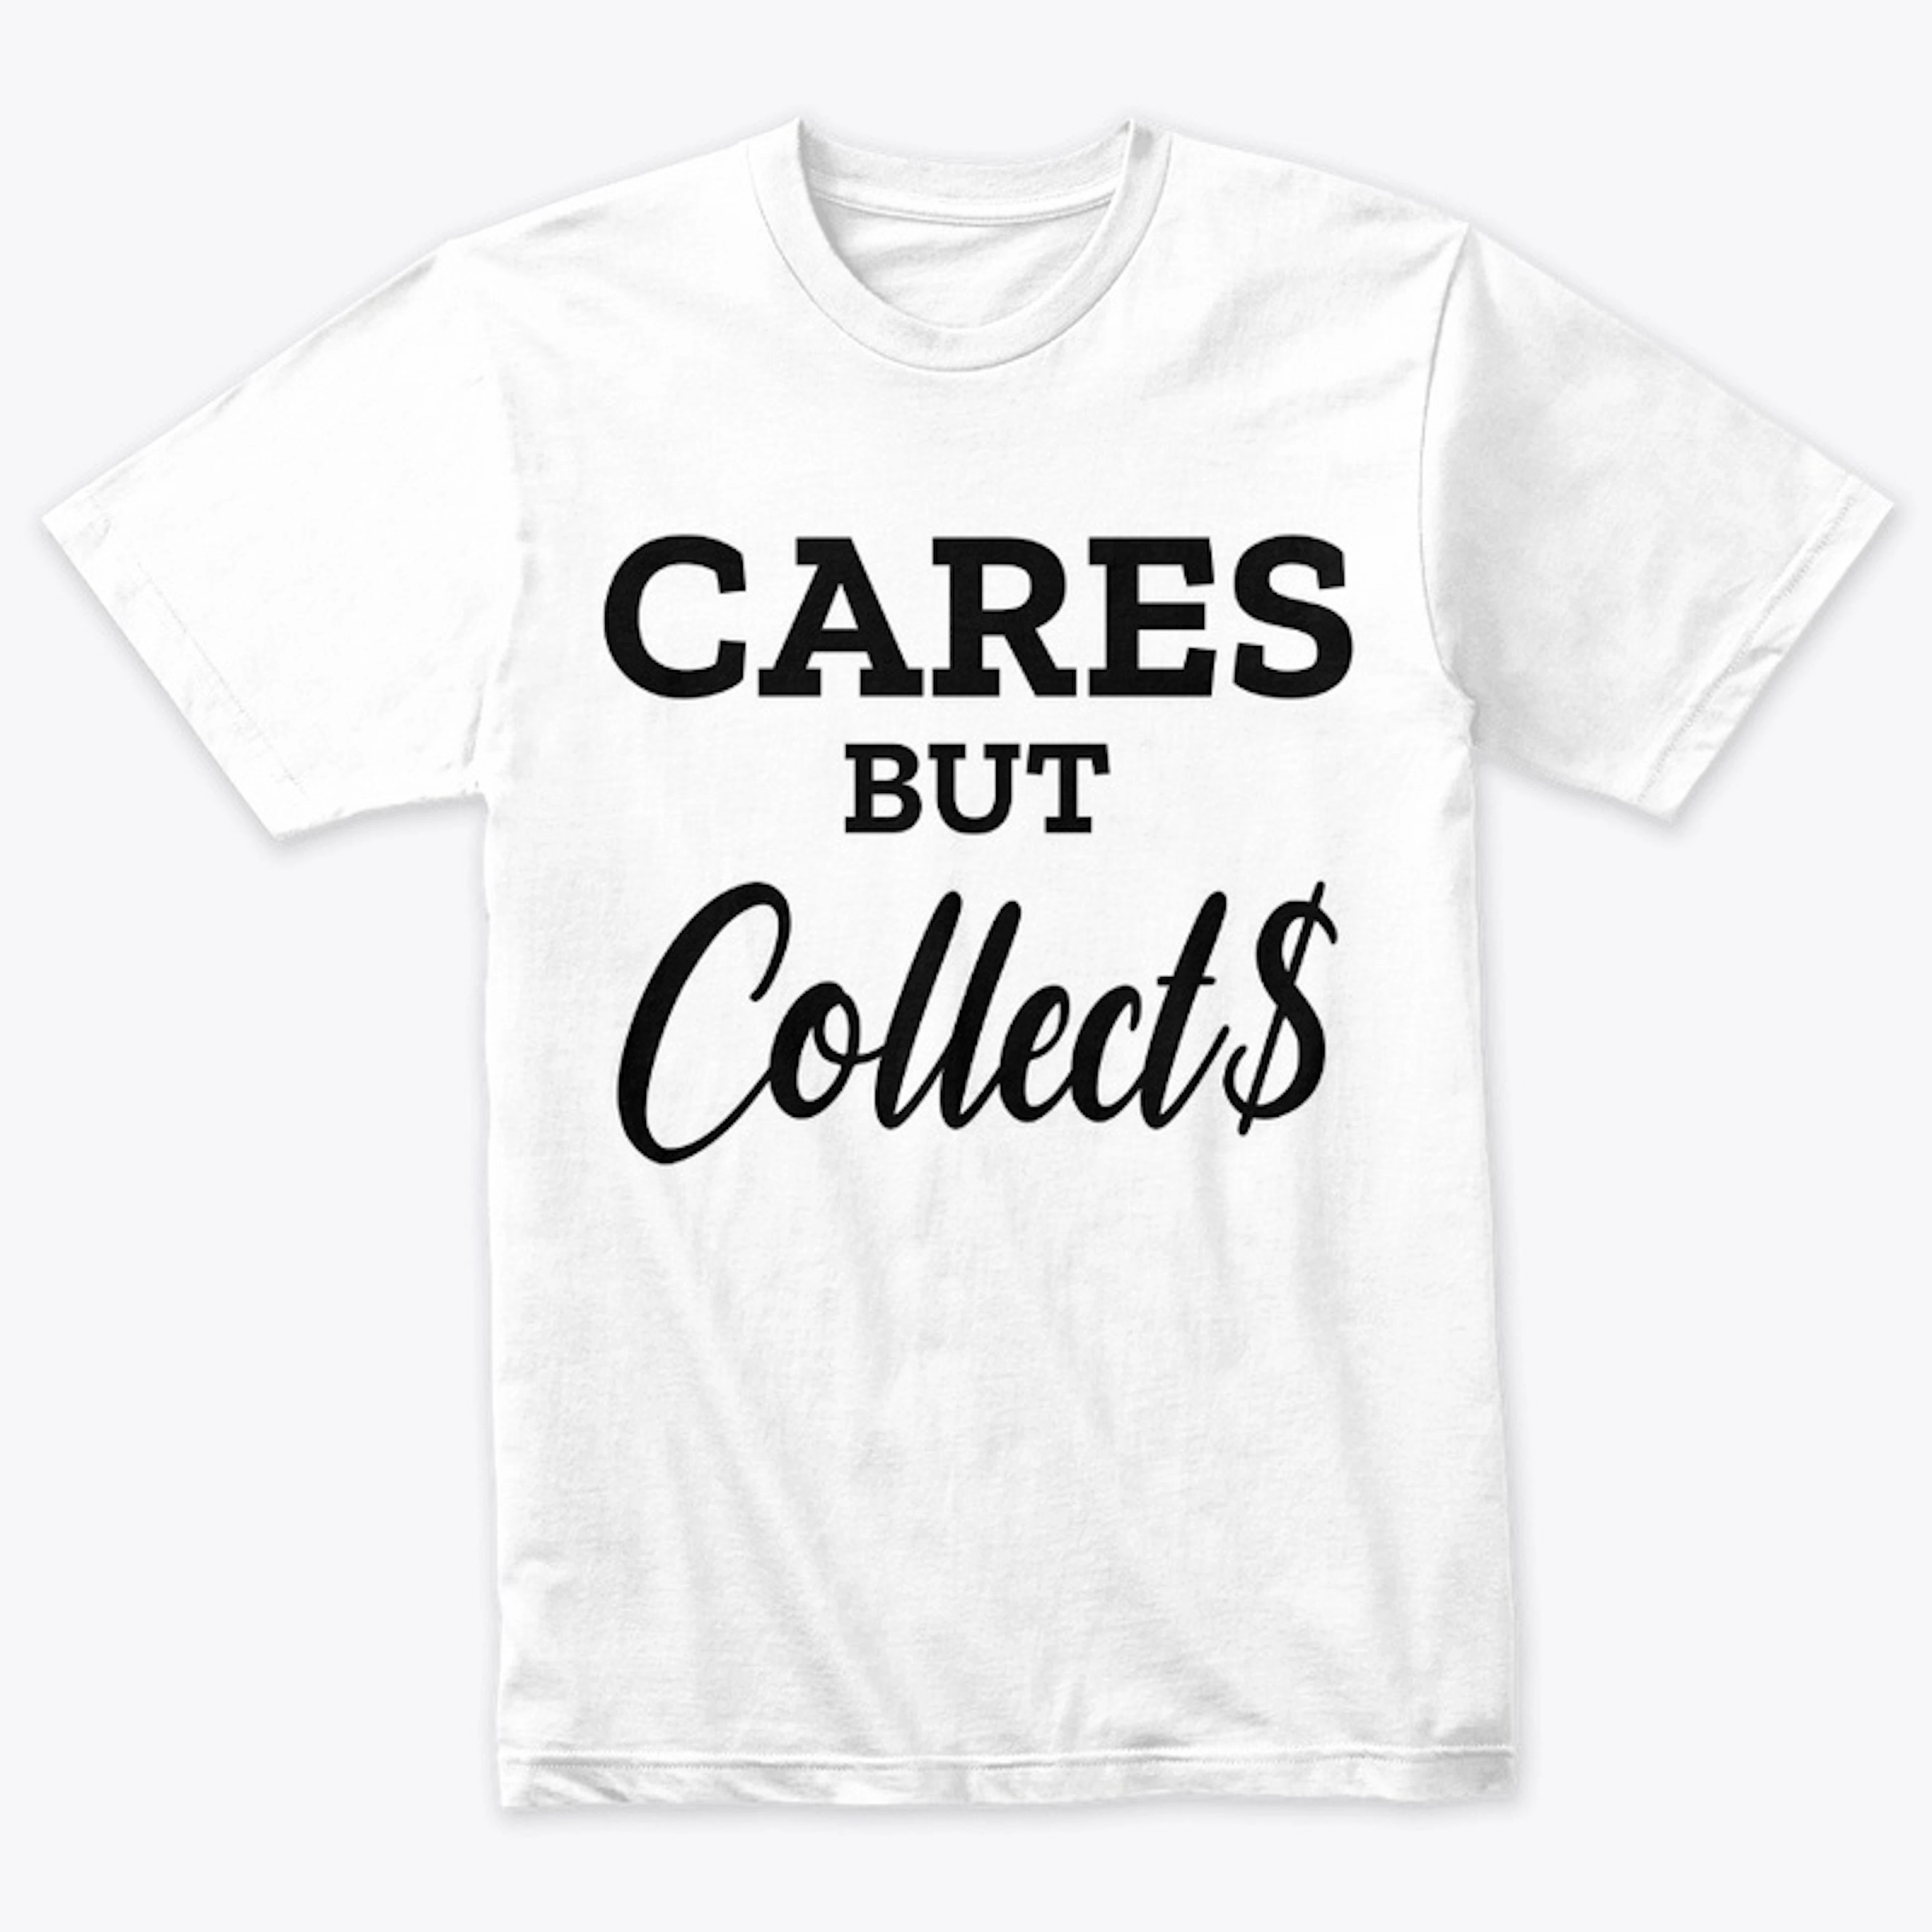 Cares but Collect$